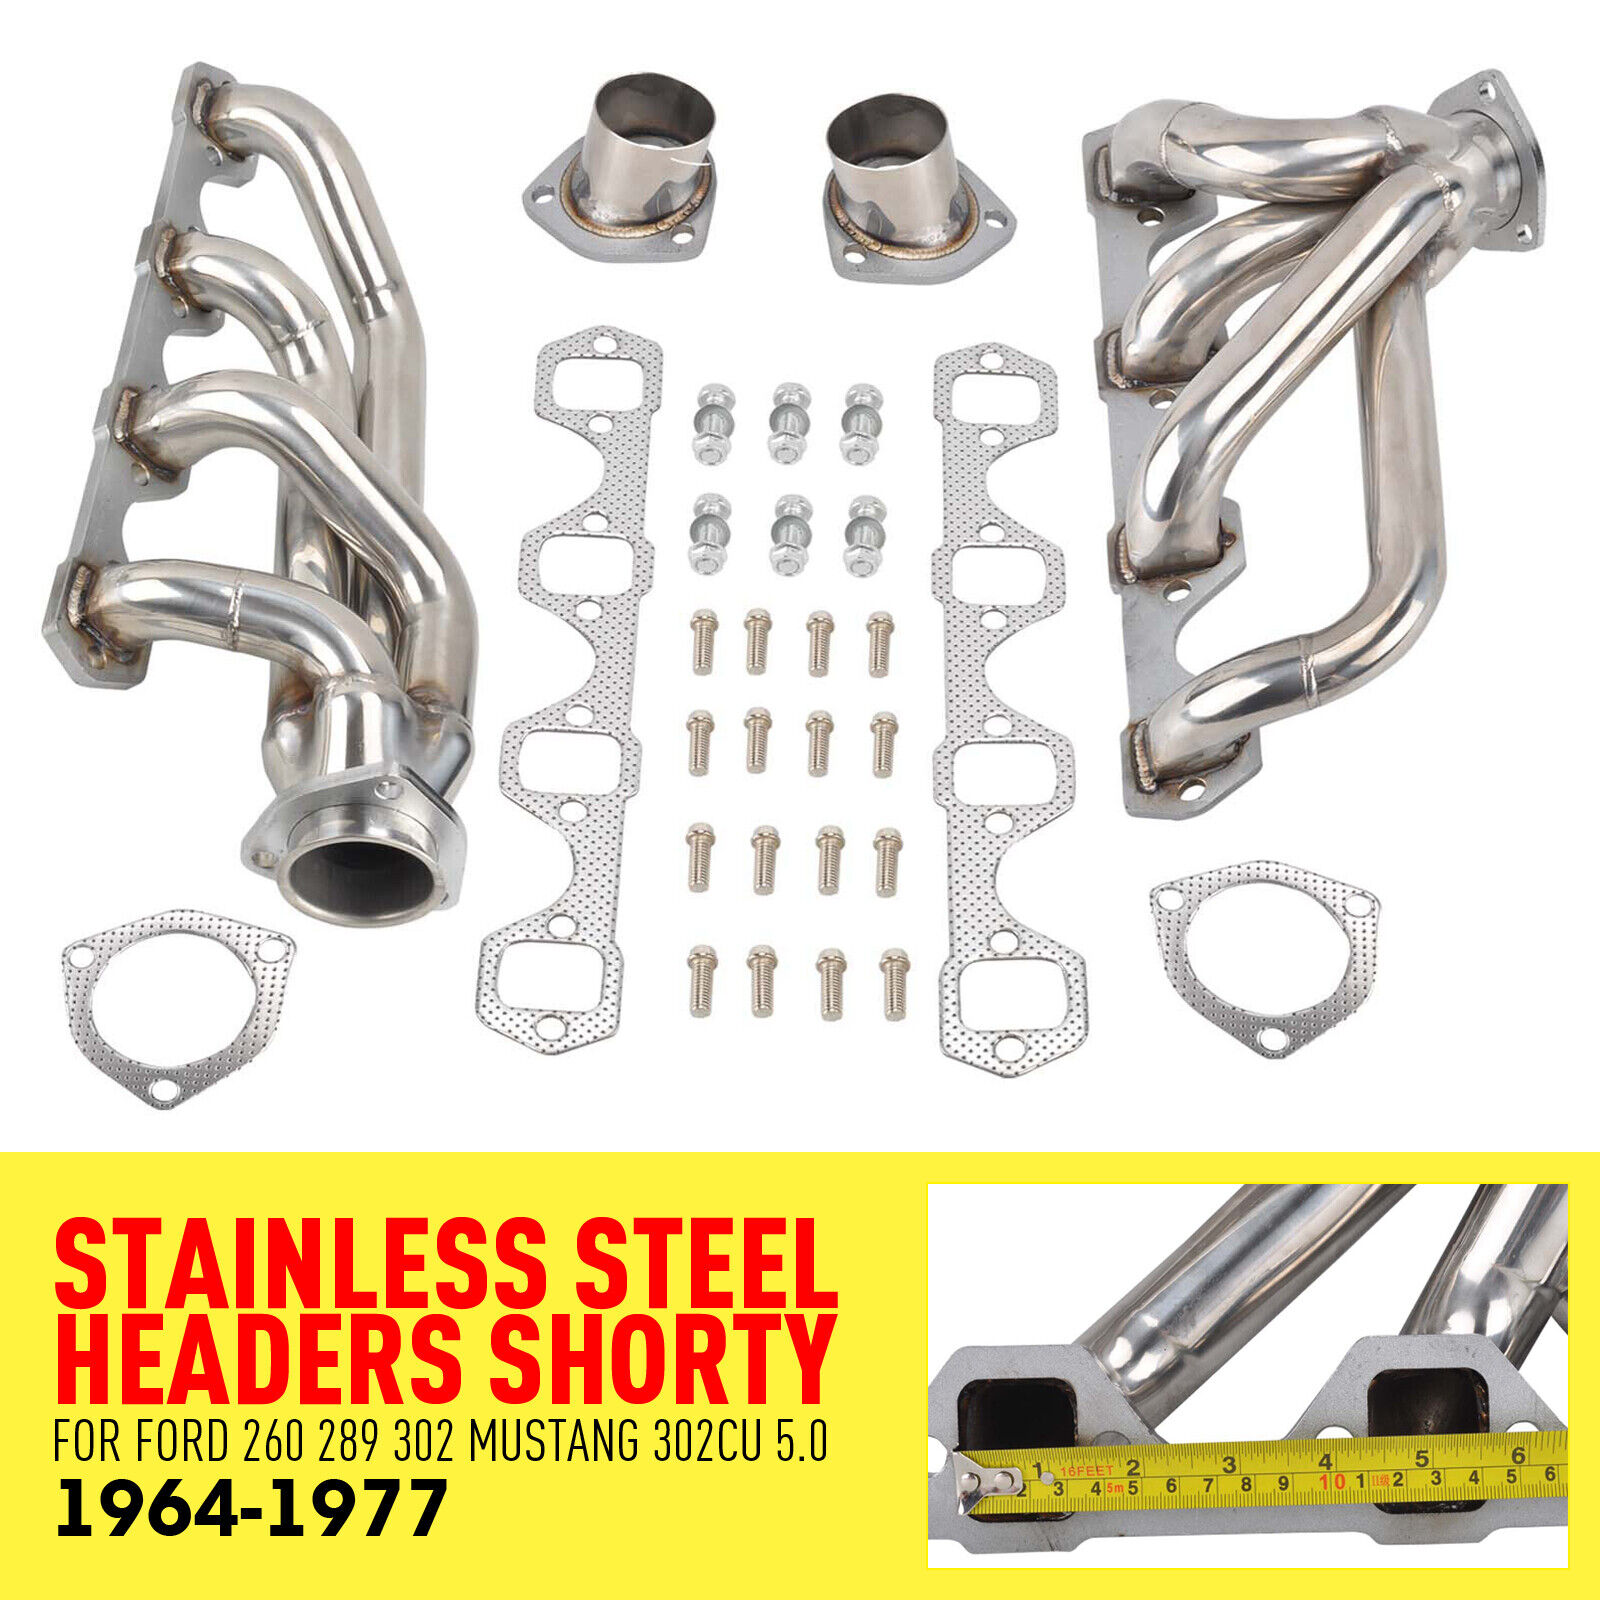 US Stainless Steel Headers Shorty For Ford 260 289 302 Mustang 302CU 5.0 1964-cj